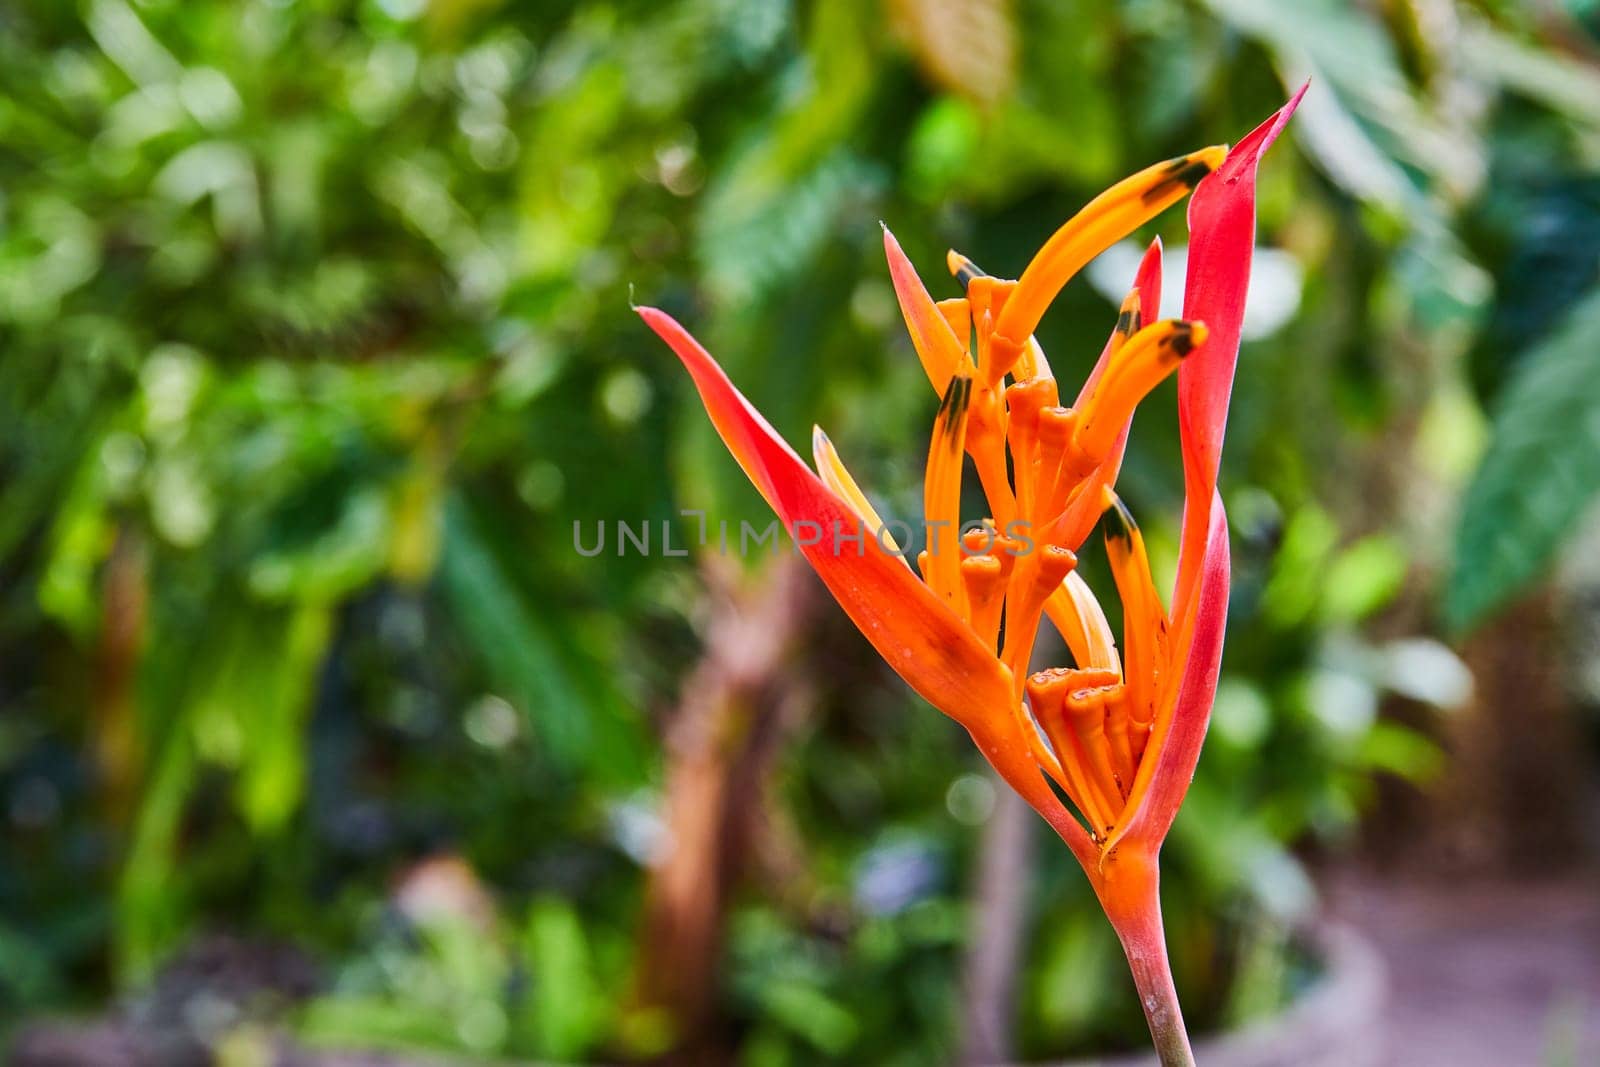 Dew-kissed vibrant heliconia amidst lush greenery, captured in Muncie, Indiana's conservatory gardens in 2023